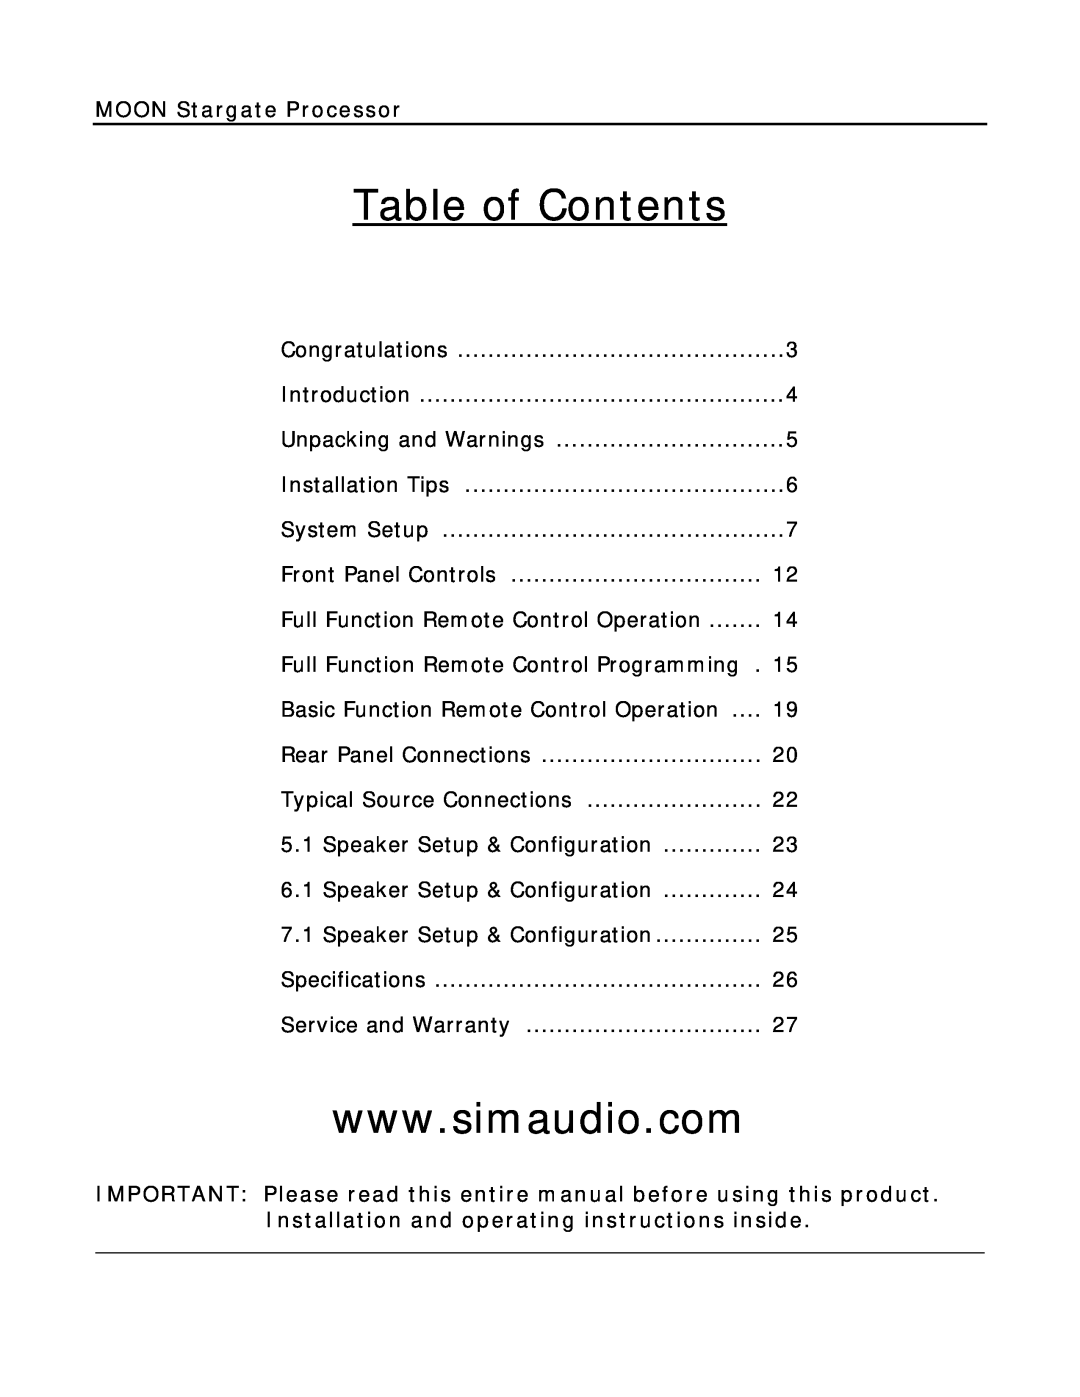 Simaudio Preamplifier and D/A converter owner manual Table of Contents, MOON Stargate Processor 